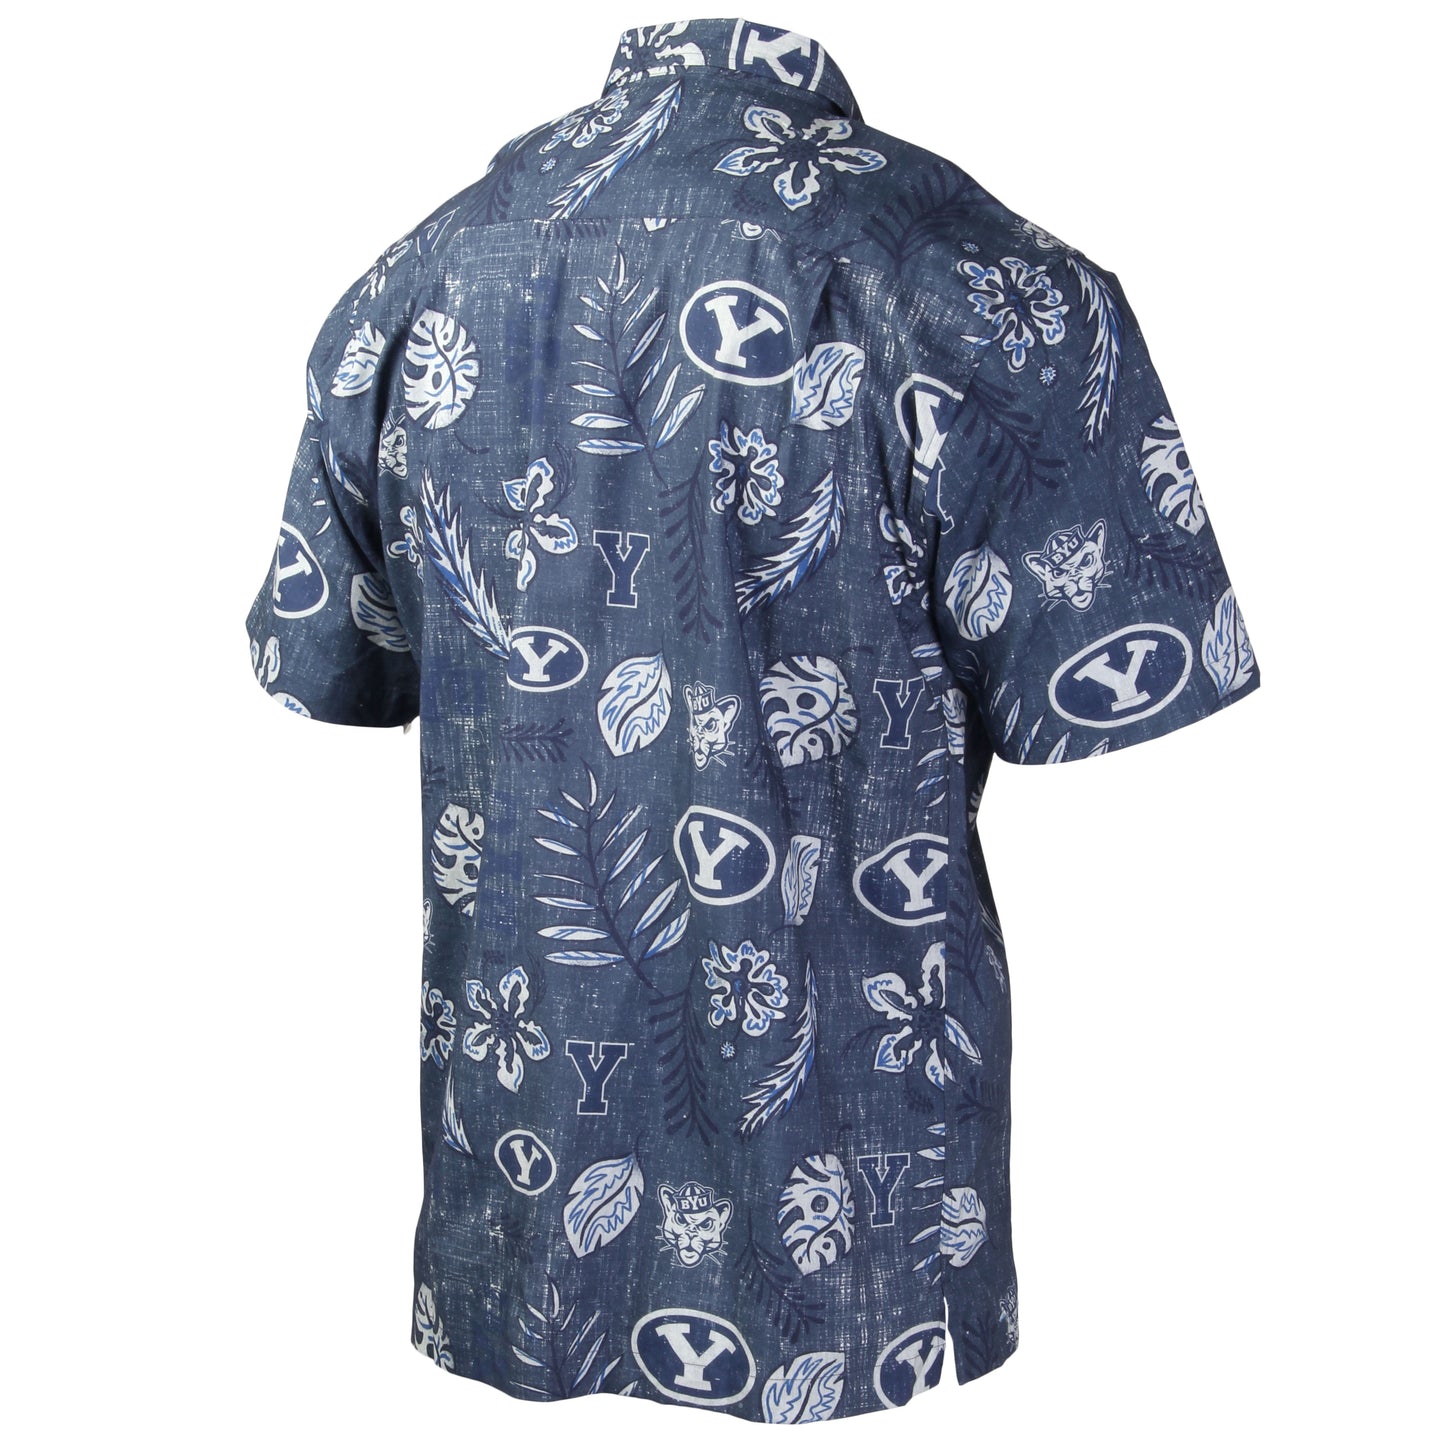 BYU Cougars Wes and Willy Mens College Hawaiian Short Sleeve Button Down Shirt Vintage Floral